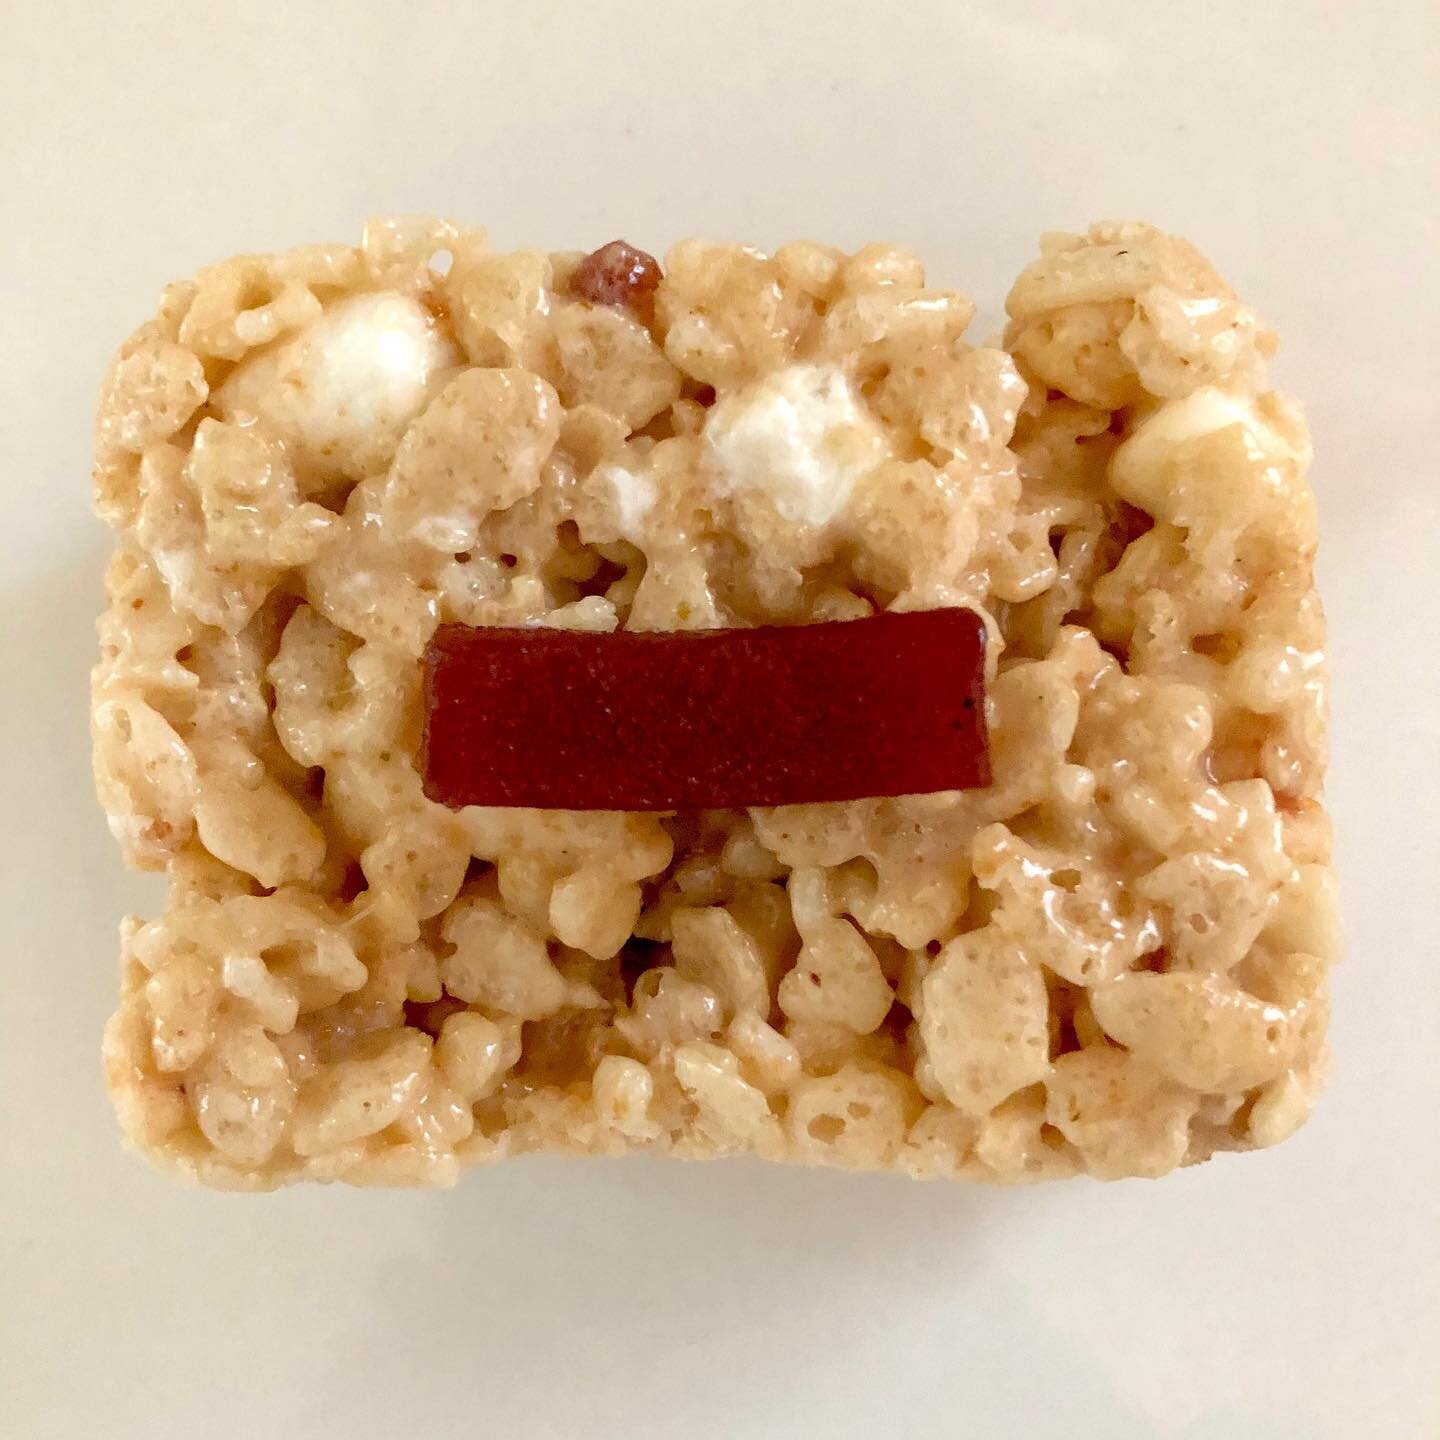 GUAVA RICE CRISPIE TREATS are back on the menu for May!

A taste of tropical paradise while we wait for summer!

-guava flavored rice crispie treat base
-guava paste cubes
-extra marshmallows 
-topped with a slice of guava paste

Available online &am